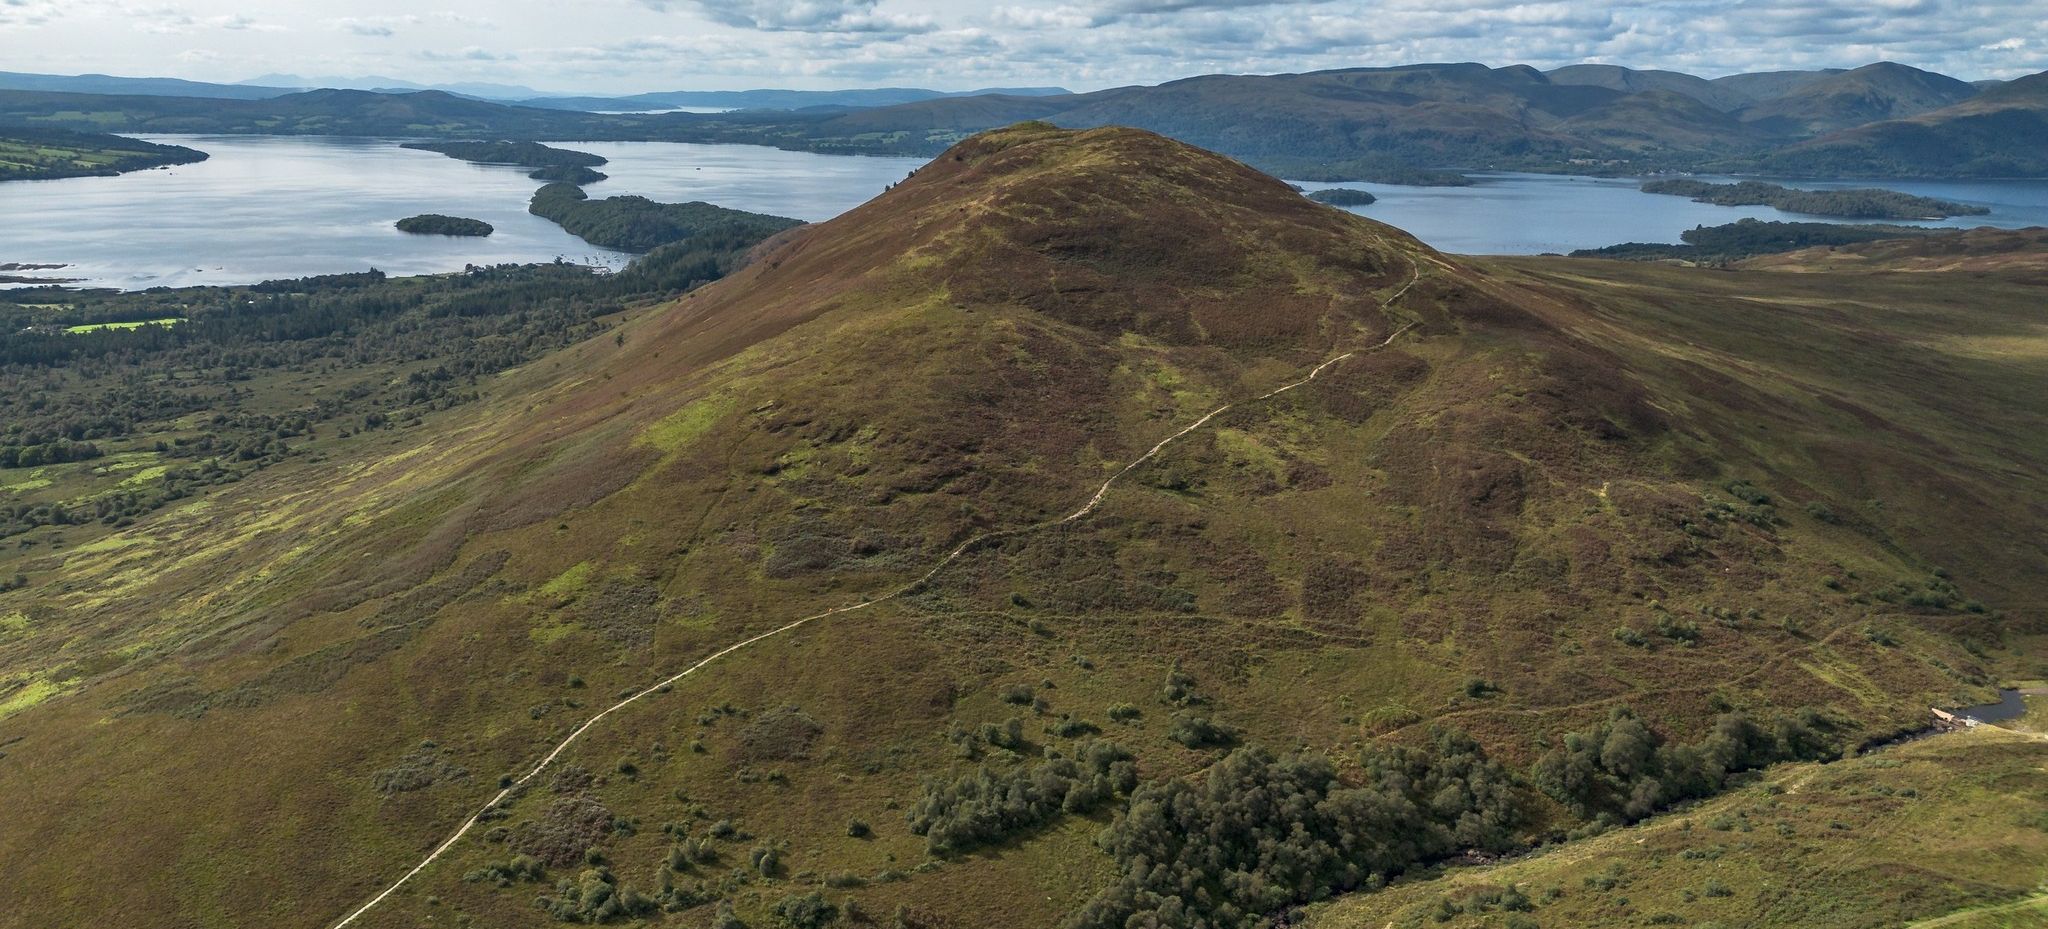 Approach to Conic Hill